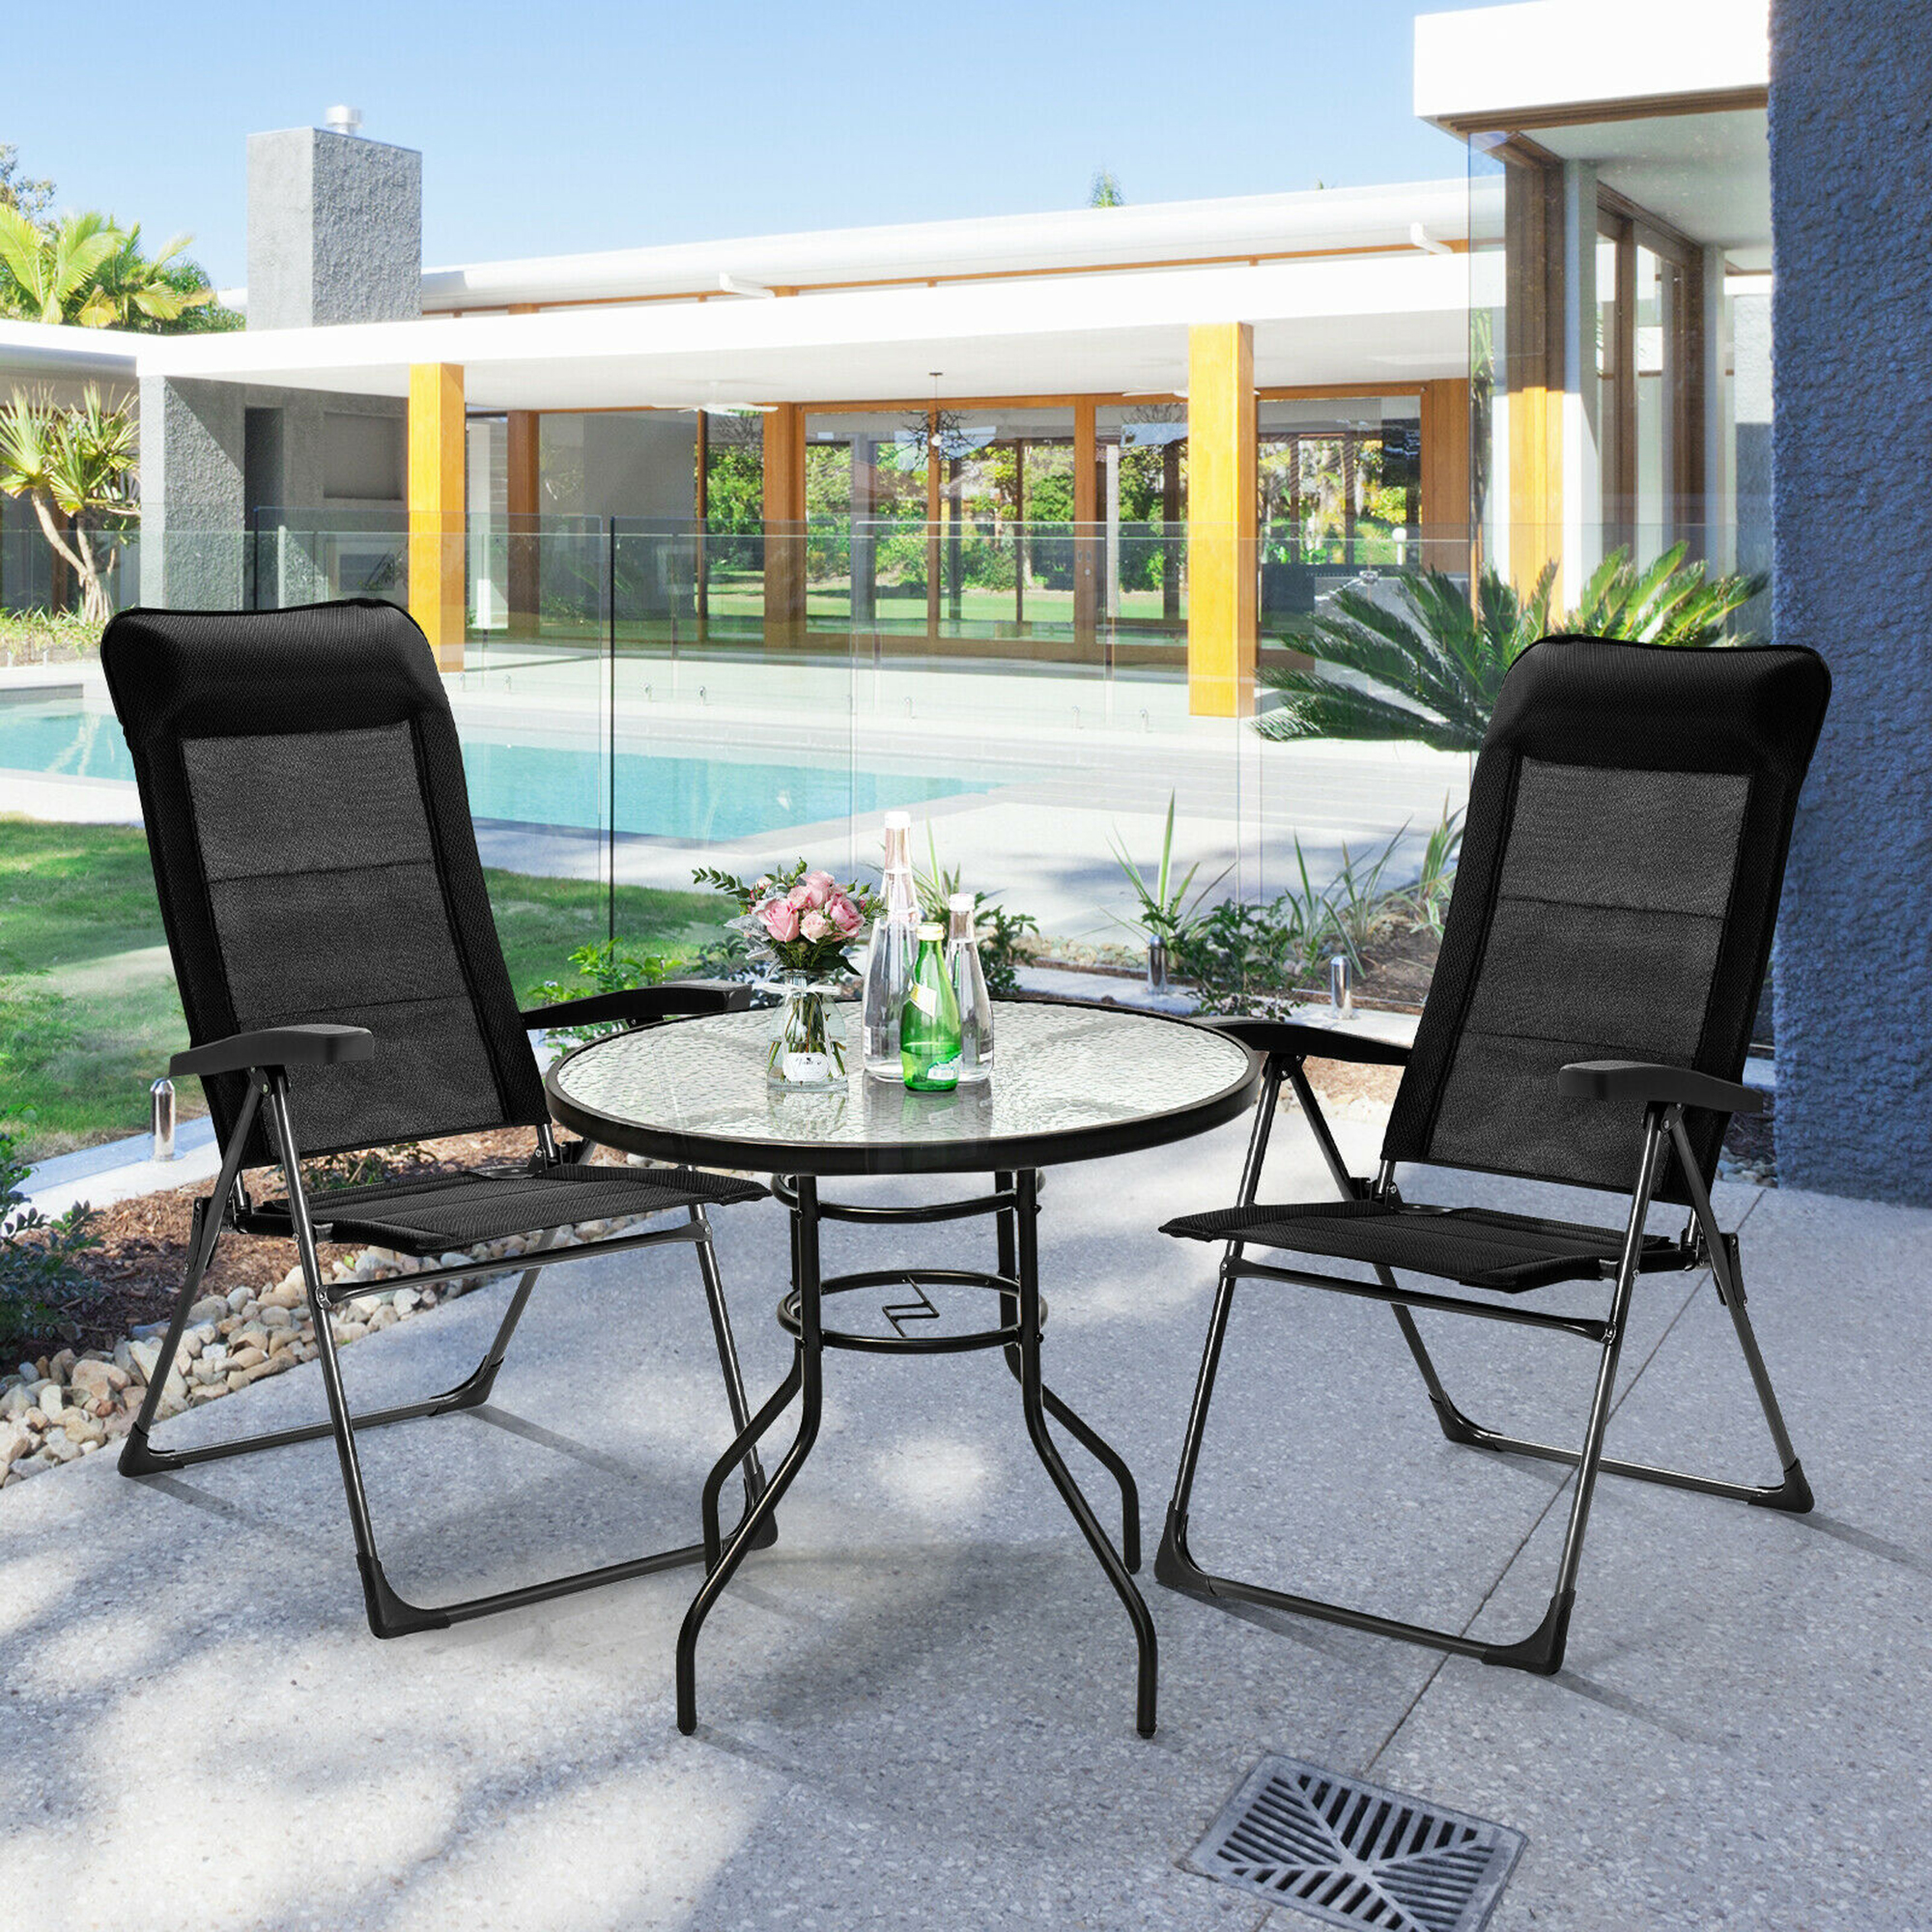 Gymax 2PCS Patio Folding Dining Chairs Portable Camping Headrest Adjust Black - image 3 of 10